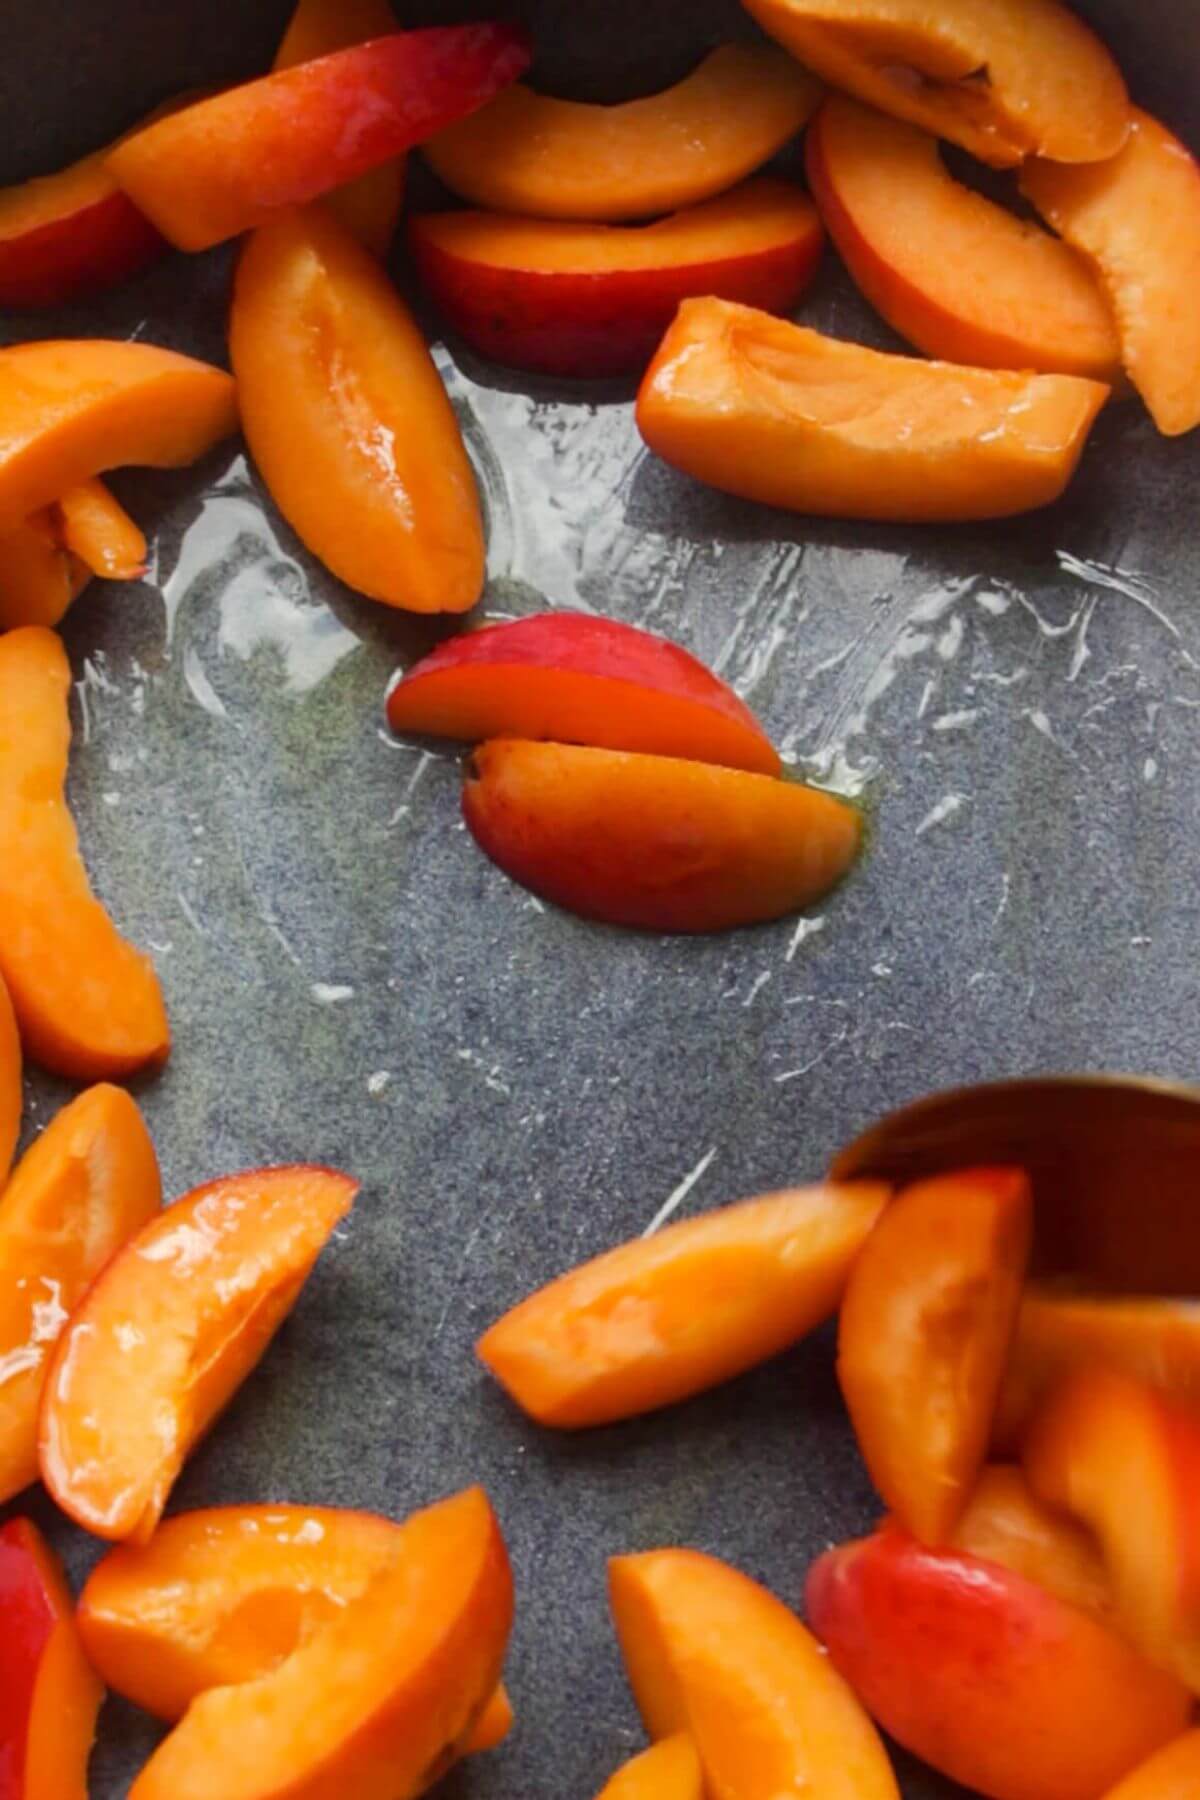 Spoon stirring olive oil through sliced apricots in a small blue oven dish.